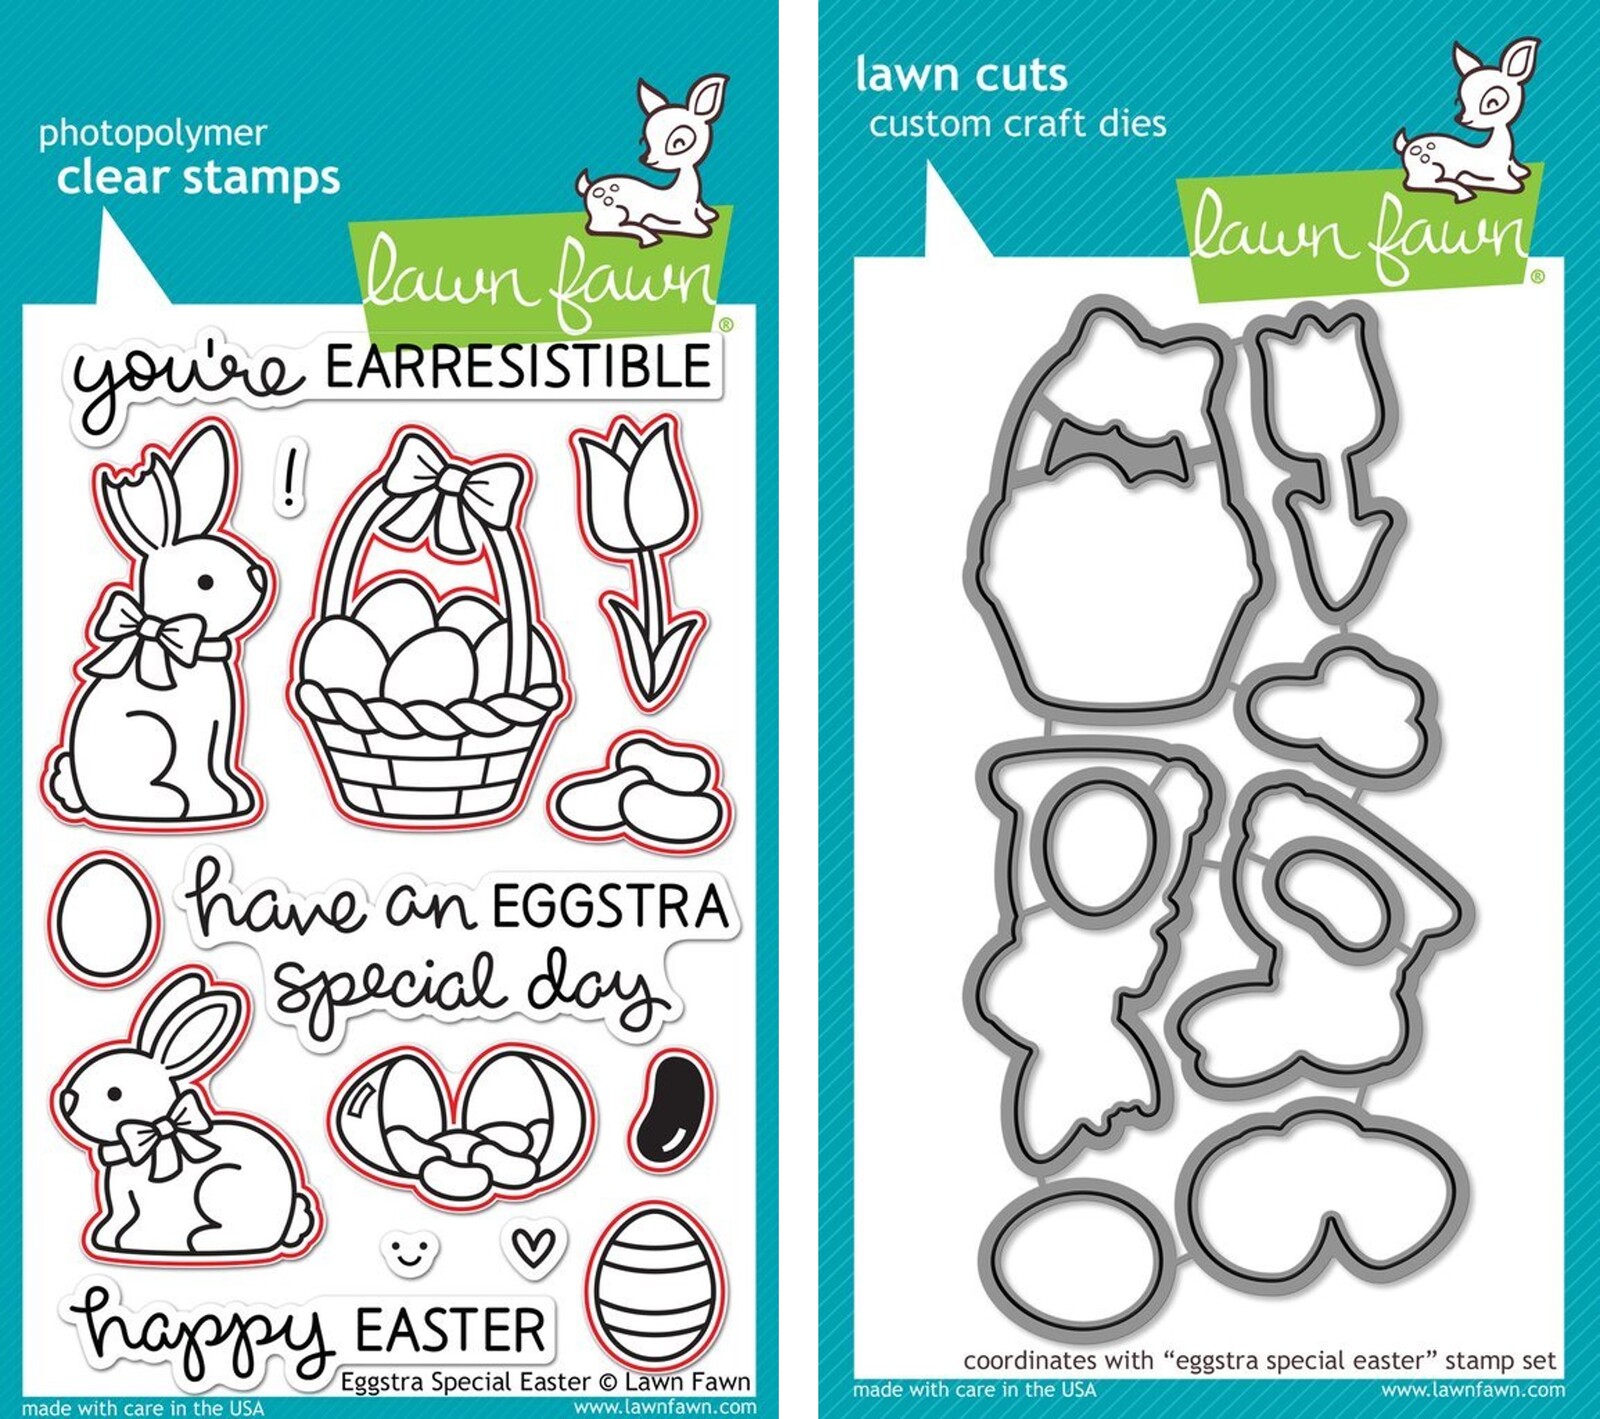 Lawn Fawn Eggstra Special Easter Stamp+Die Bundle